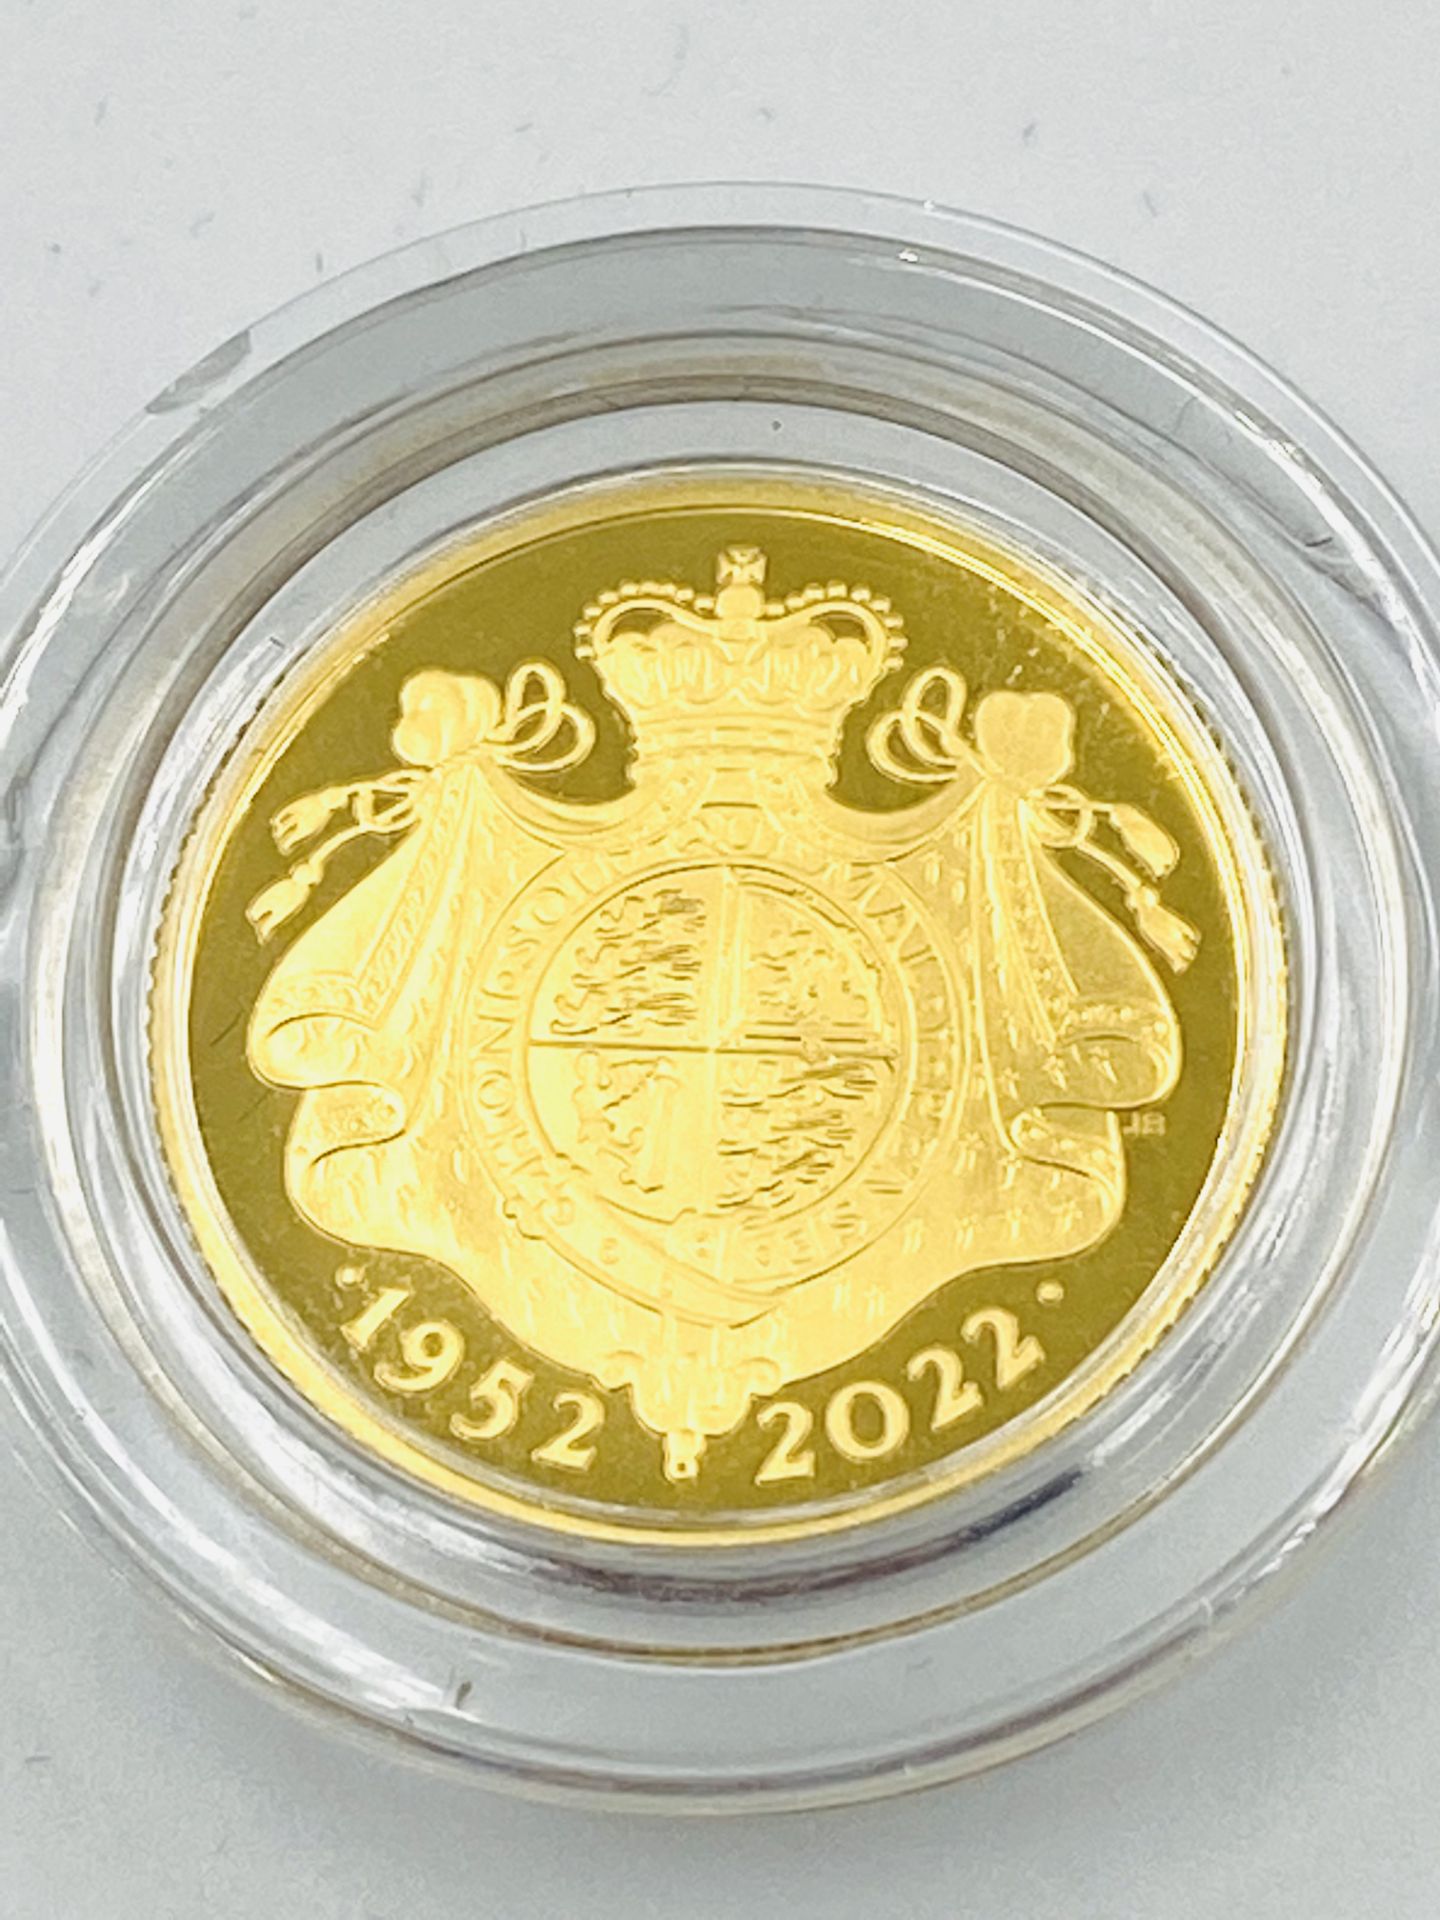 Royal Mint Platinum Jubilee of Her Majesty the Queen, 2022 limited edition gold proof coin - Image 4 of 4